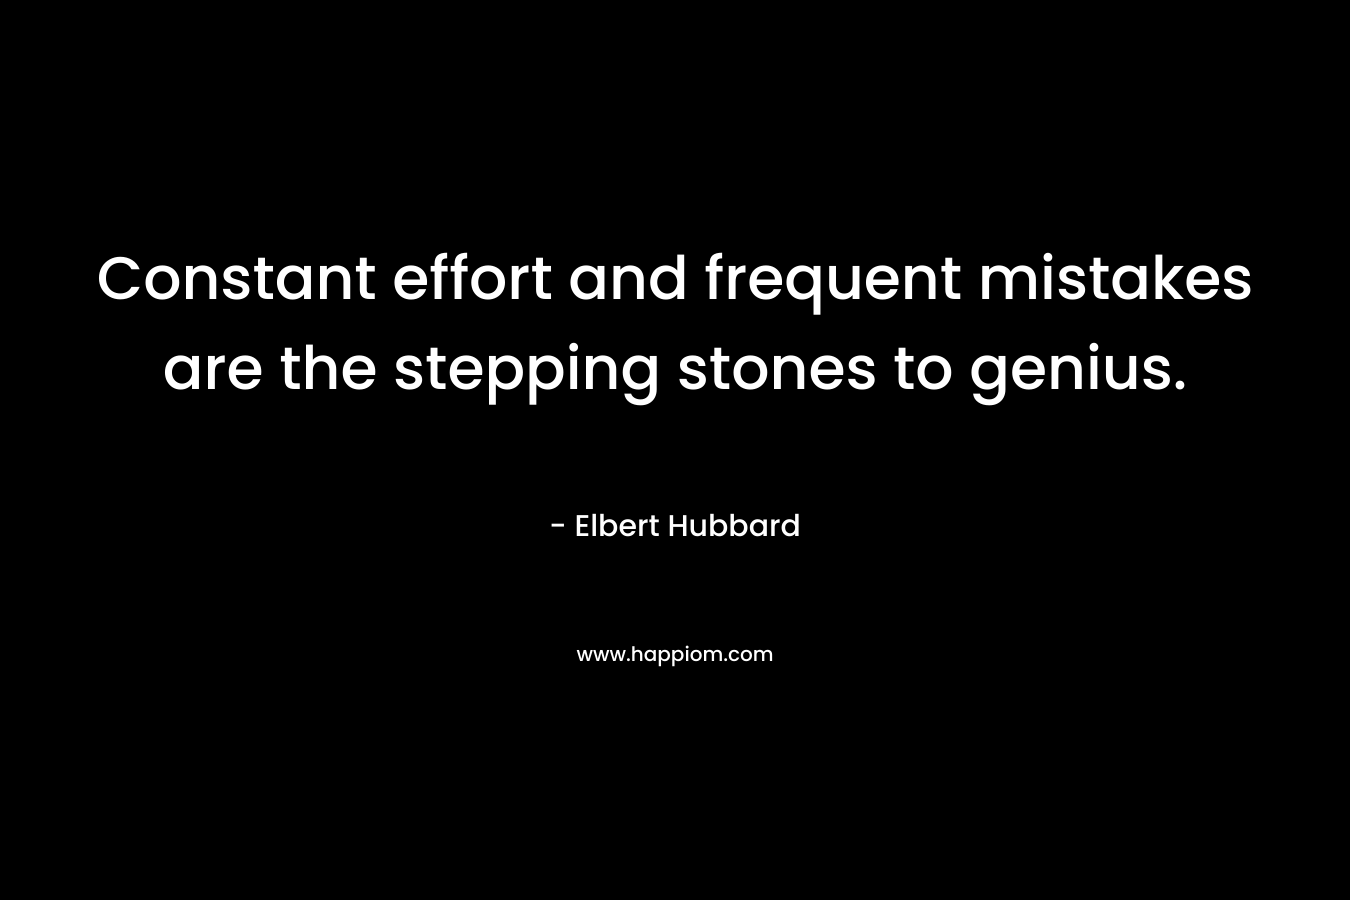 Constant effort and frequent mistakes are the stepping stones to genius. – Elbert Hubbard